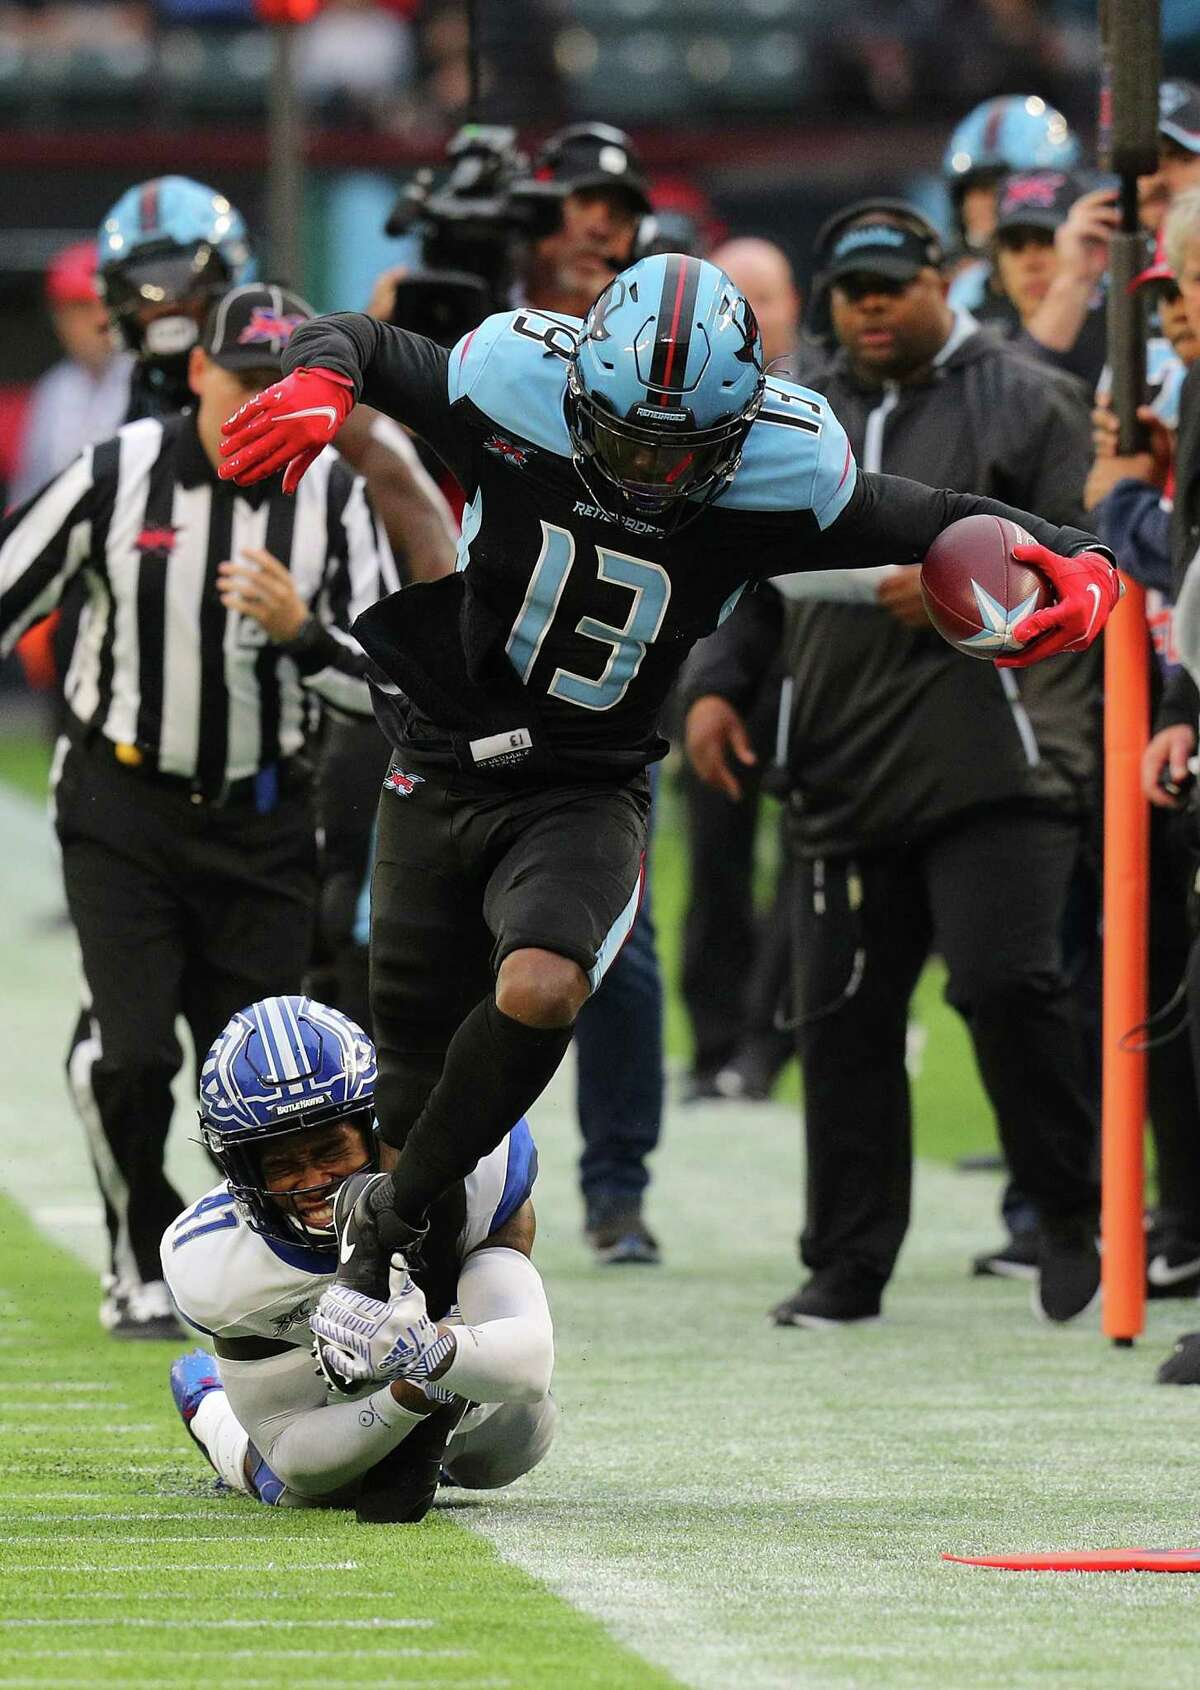 ARLINGTON, TEXAS - FEBRUARY 09: Darius Hillary #41 of the St. Louis Battlehawks tackles Jeff Badet #13 of the Dallas Renegades in the first half of an XFL Football game on February 09, 2020 in Arlington, Texas. (Photo by Richard Rodriguez/Getty Images)